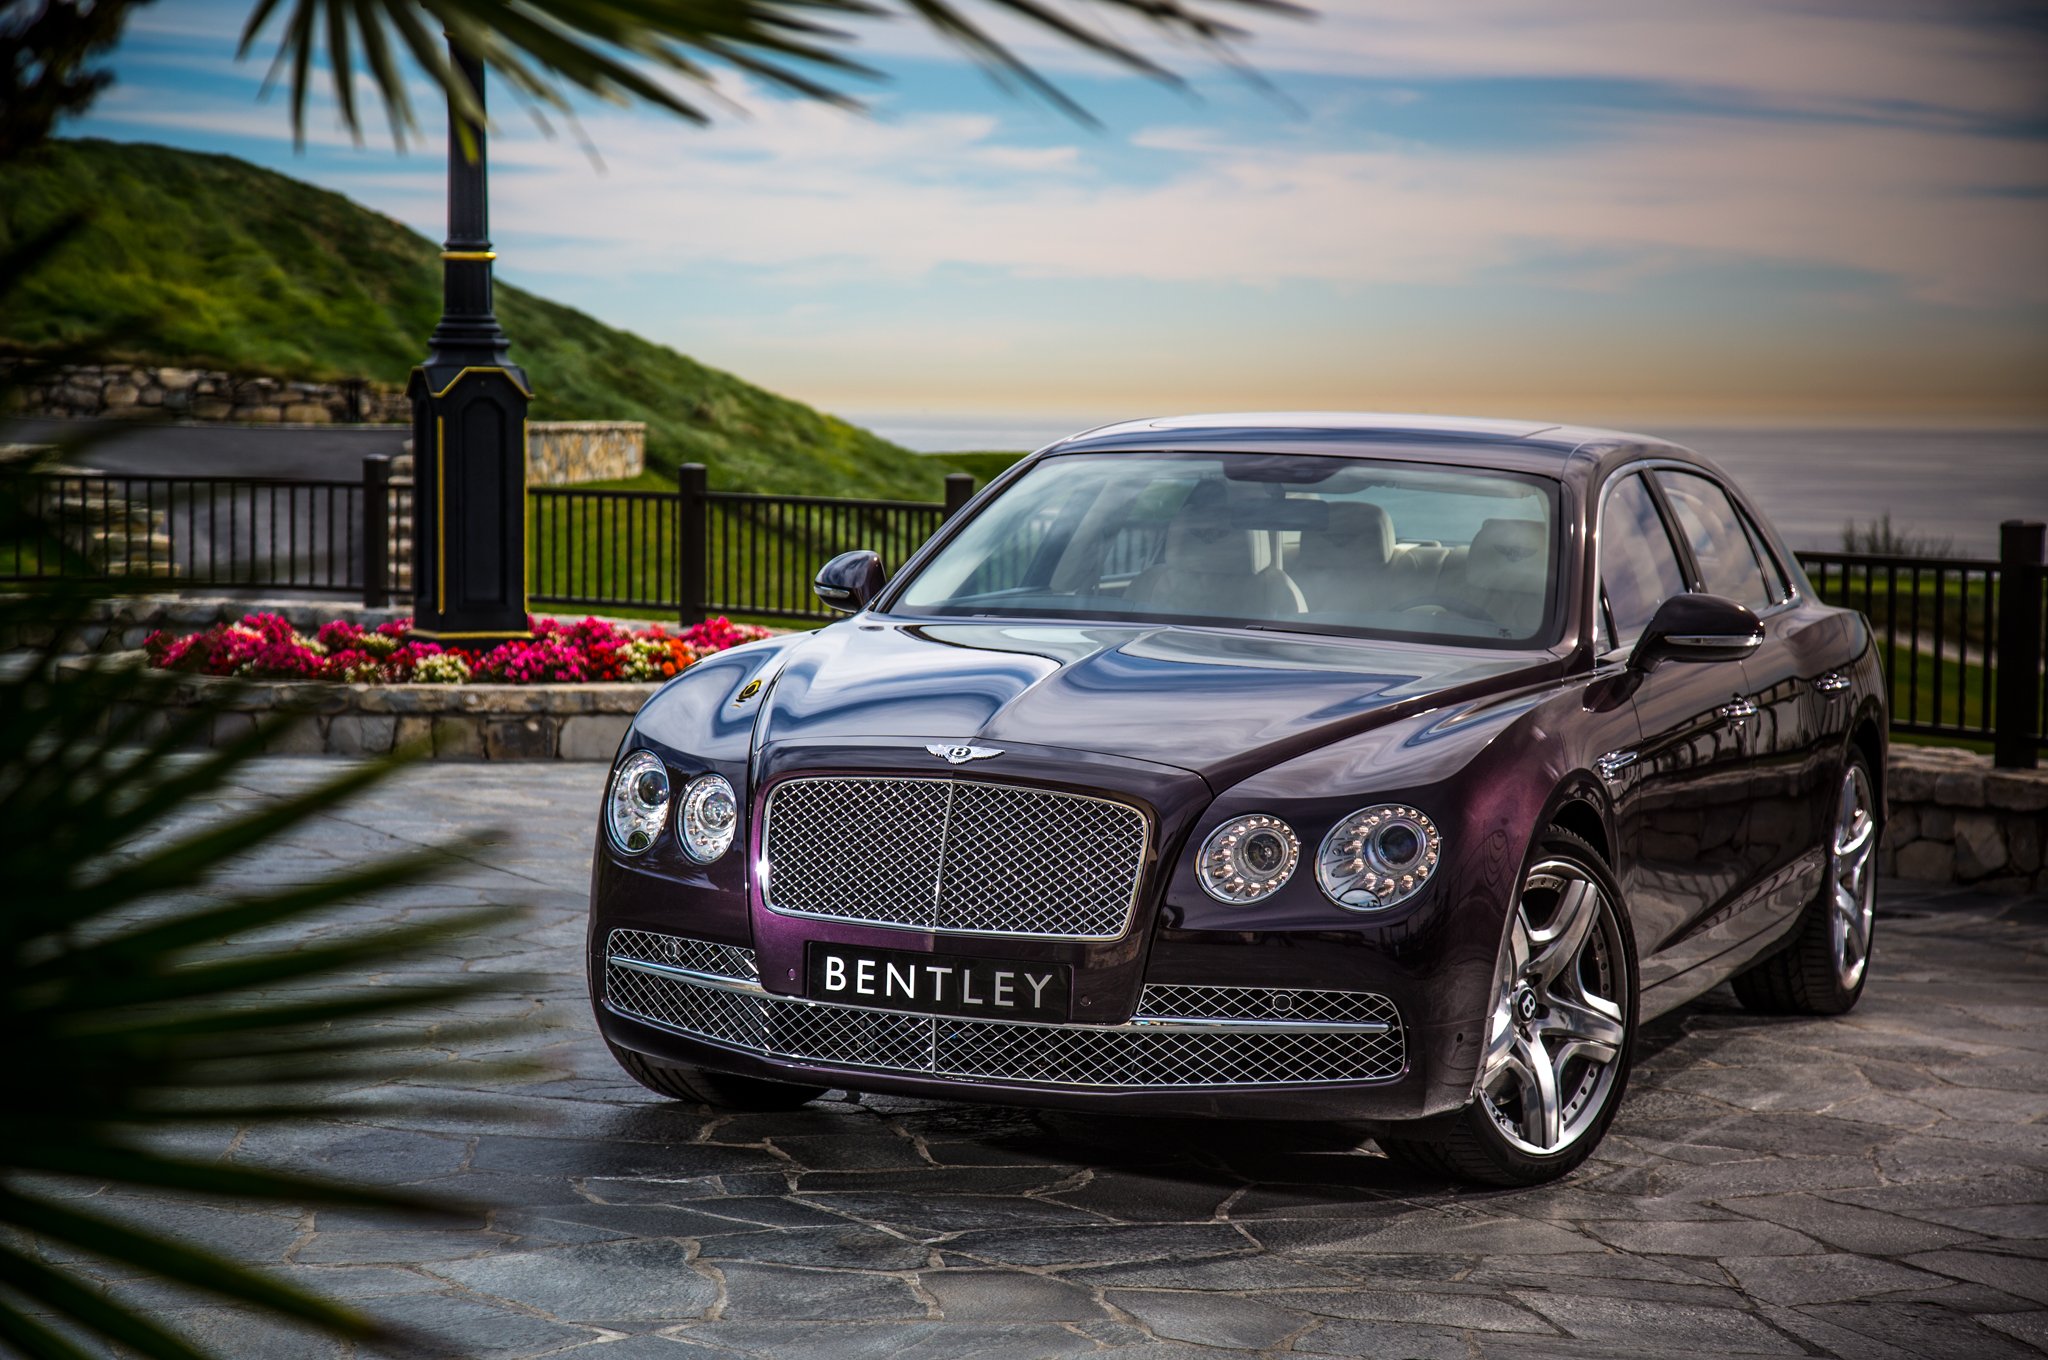 Bentley Flying Spur. Бентли Flying Spur. Bentley Flying Spur 2016. Bentley Flying Spur gt.